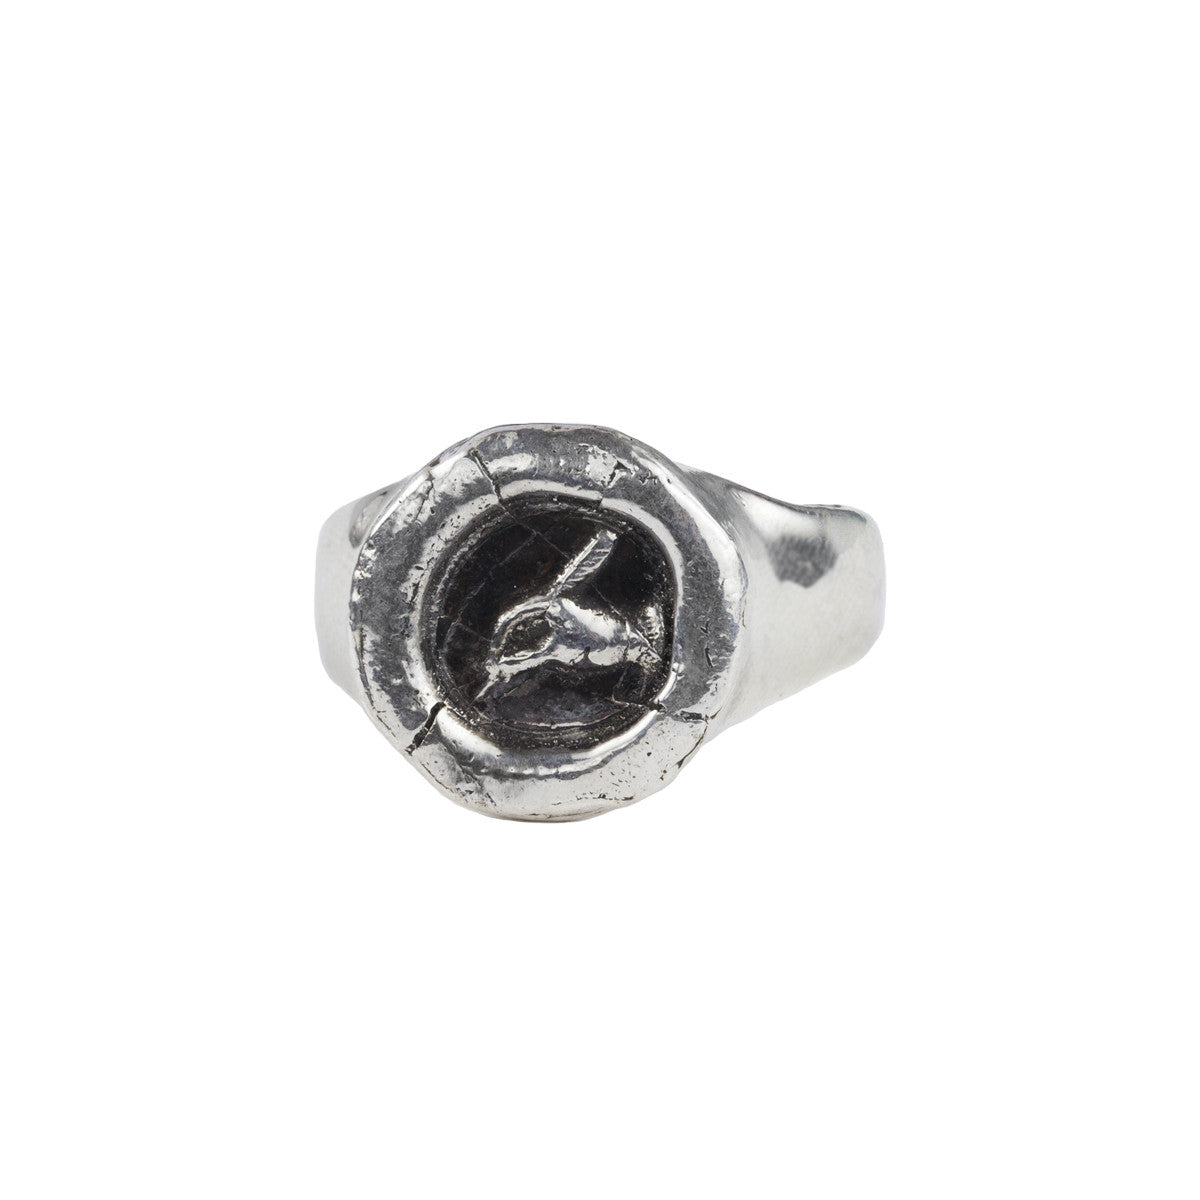 A sterling silver signet ring with our silver Writer talisman.